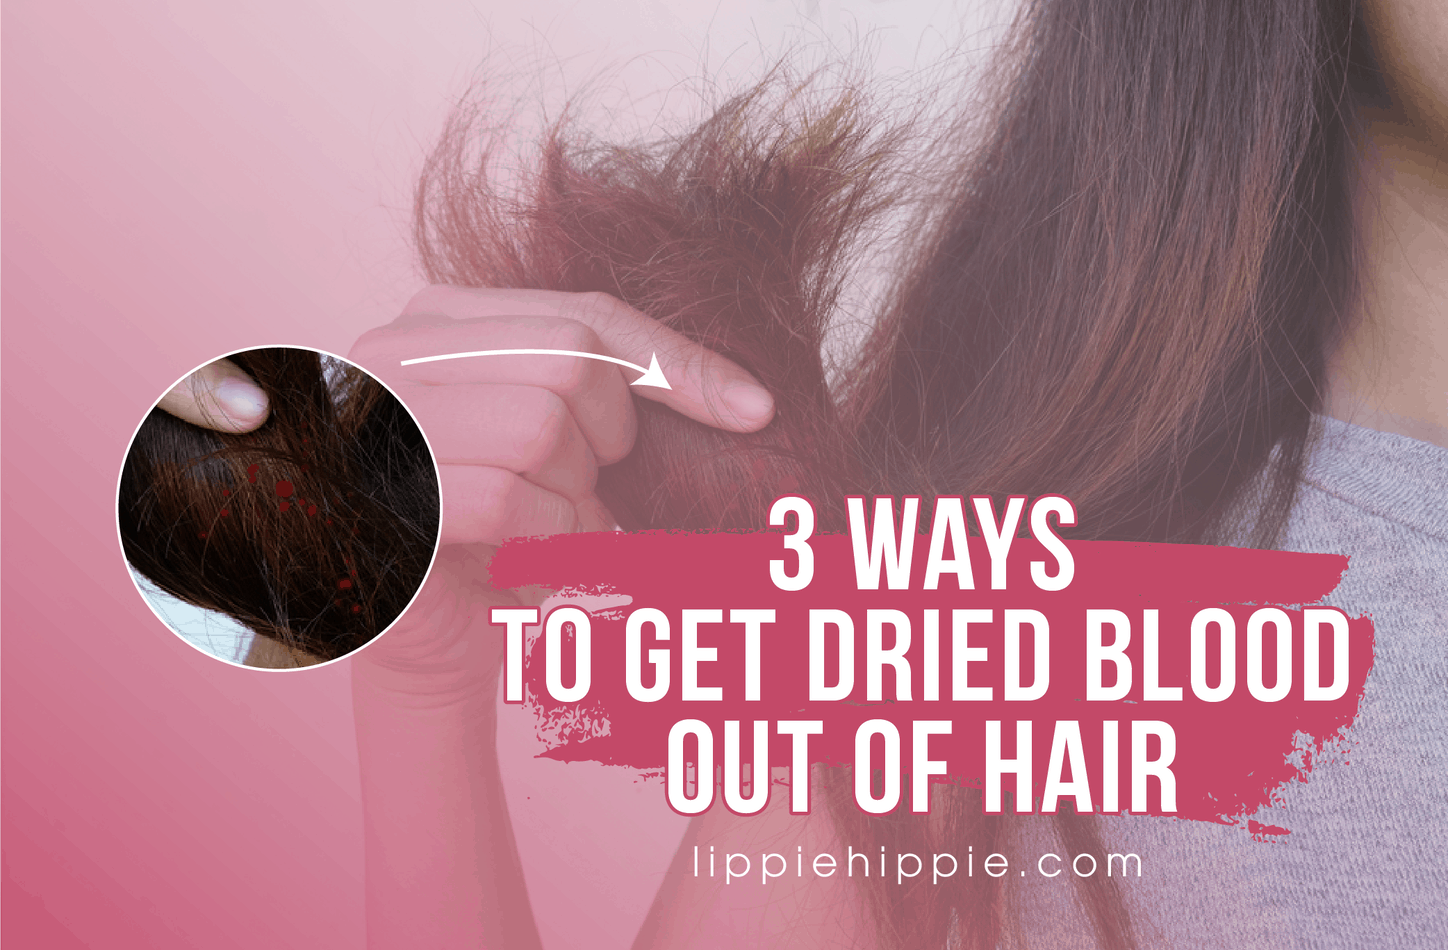 3 Ways To Get Dried Blood Out Of Hair